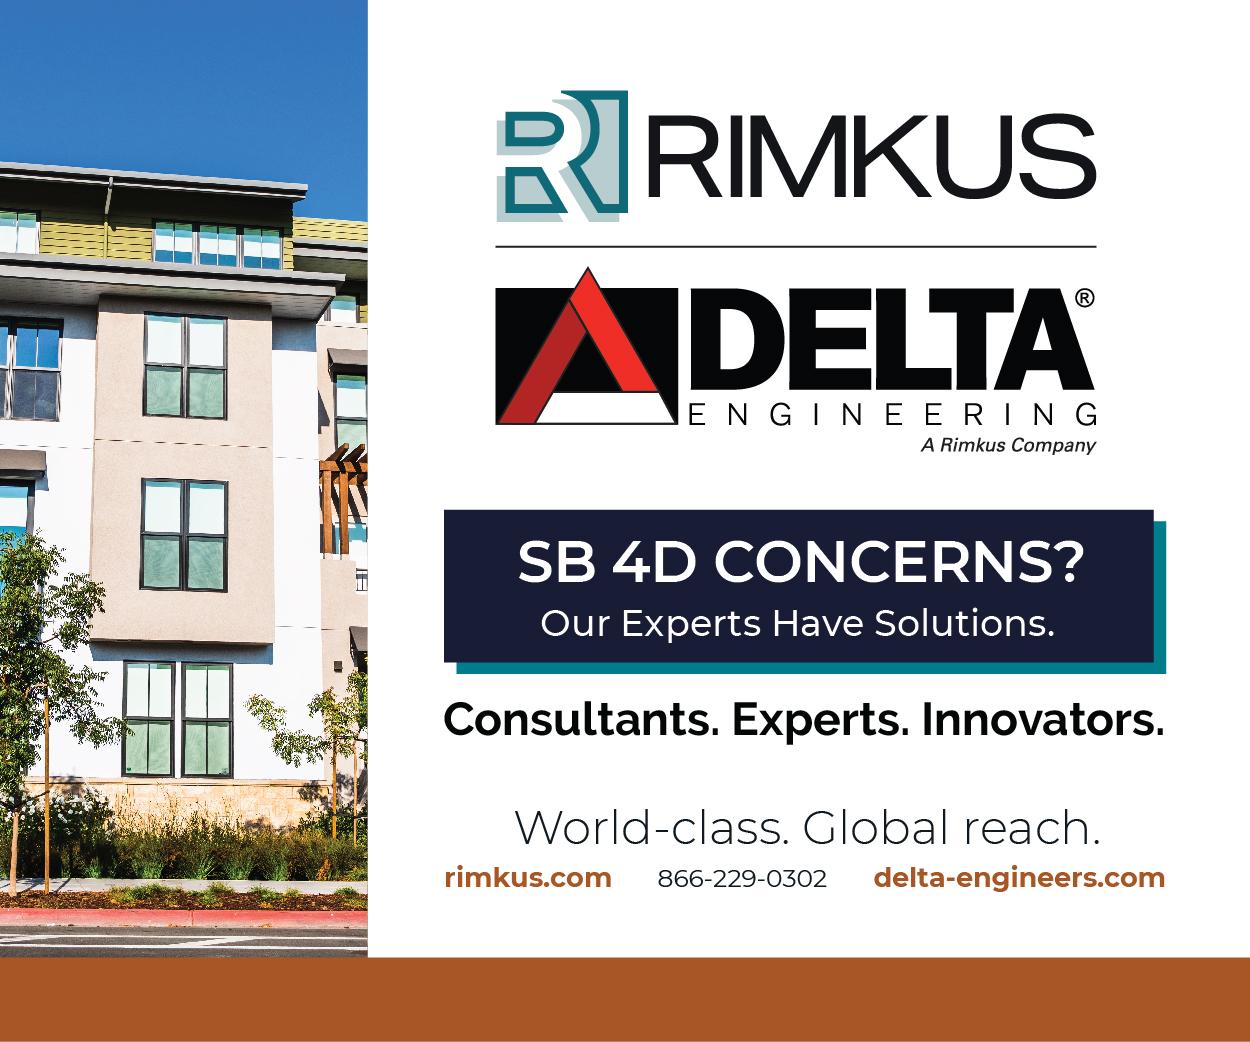 Maximizing the value and life cycle of a building requires continuously maintaining performance and improving energy efficiency Learn how Rimkus can help with your Building Inspections & Repair.